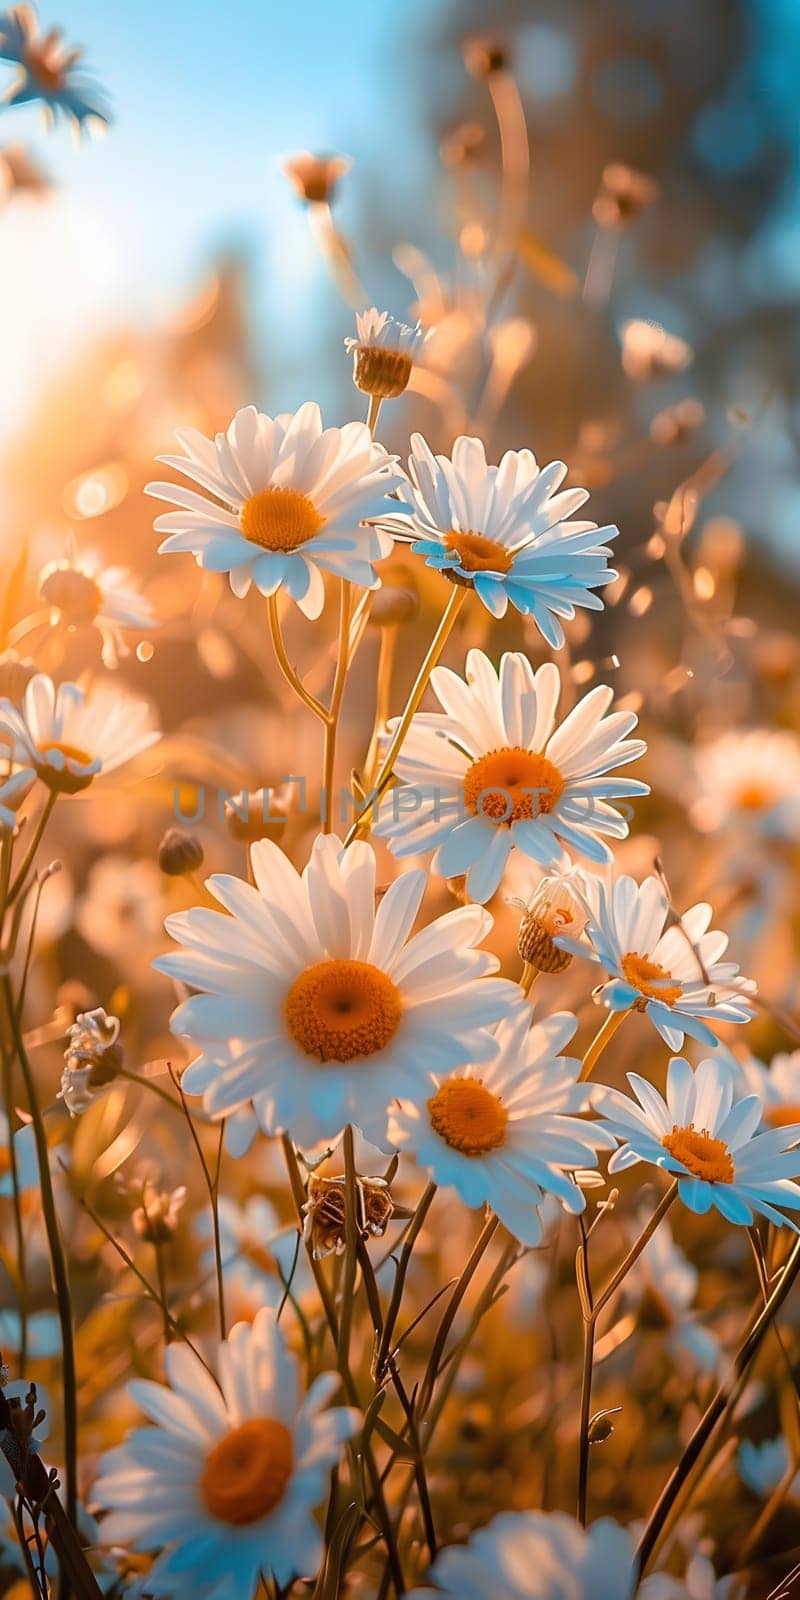 A picturesque field of daisies with the sun shining through, creating a stunning contrast of azure skies and vibrant orange petals against the lush green grass